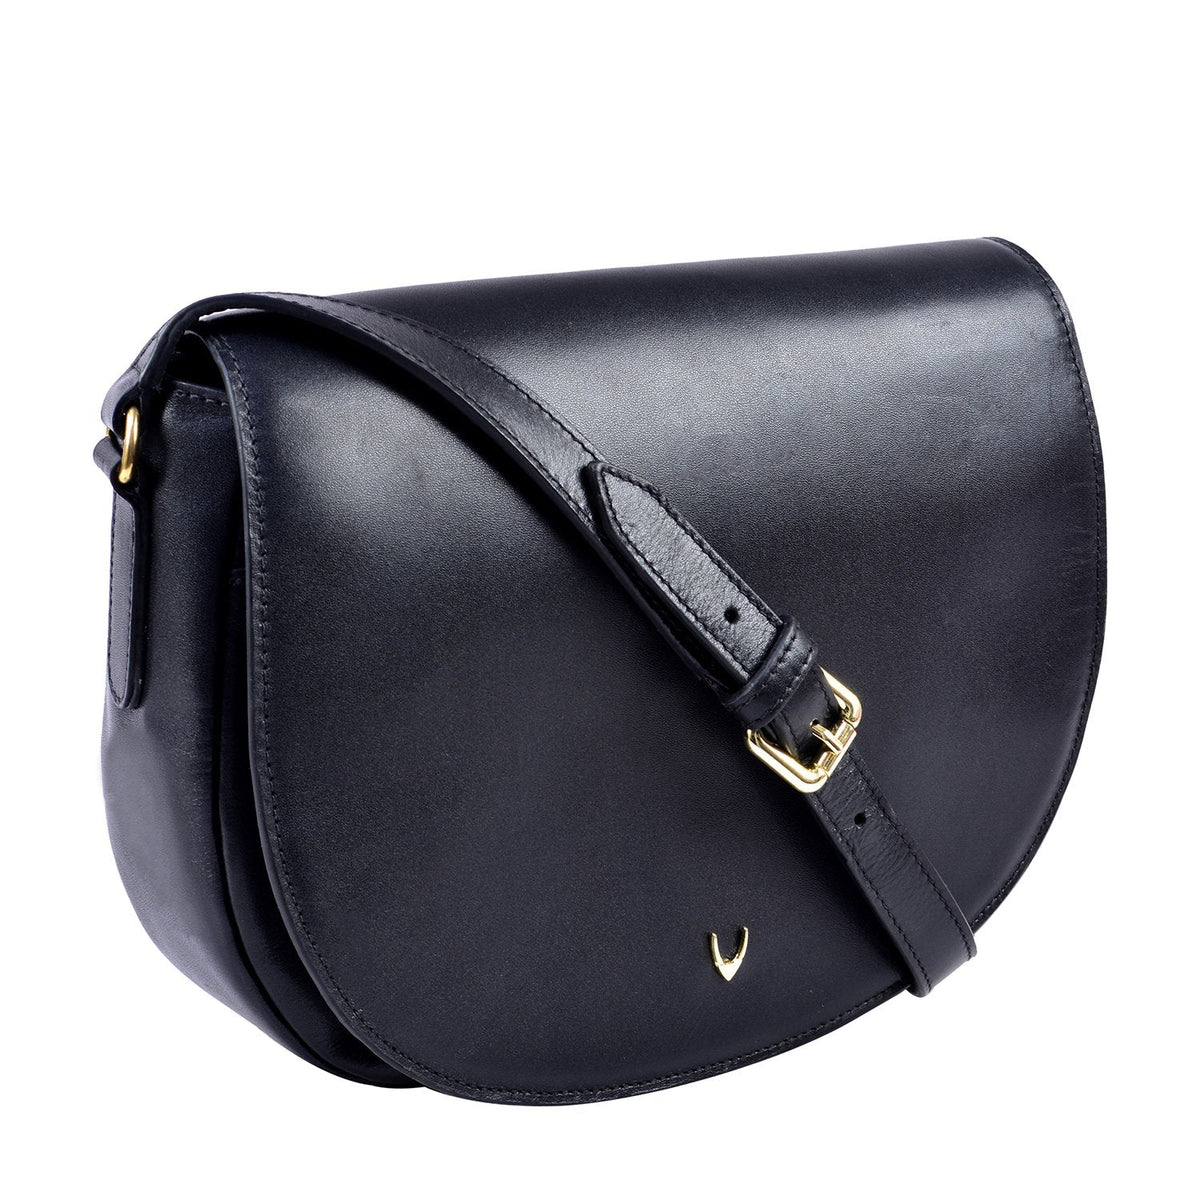 Bags & Luggage - Women's Bags - Crossbody Bags Nelly Classic Leather Crossbody Bag